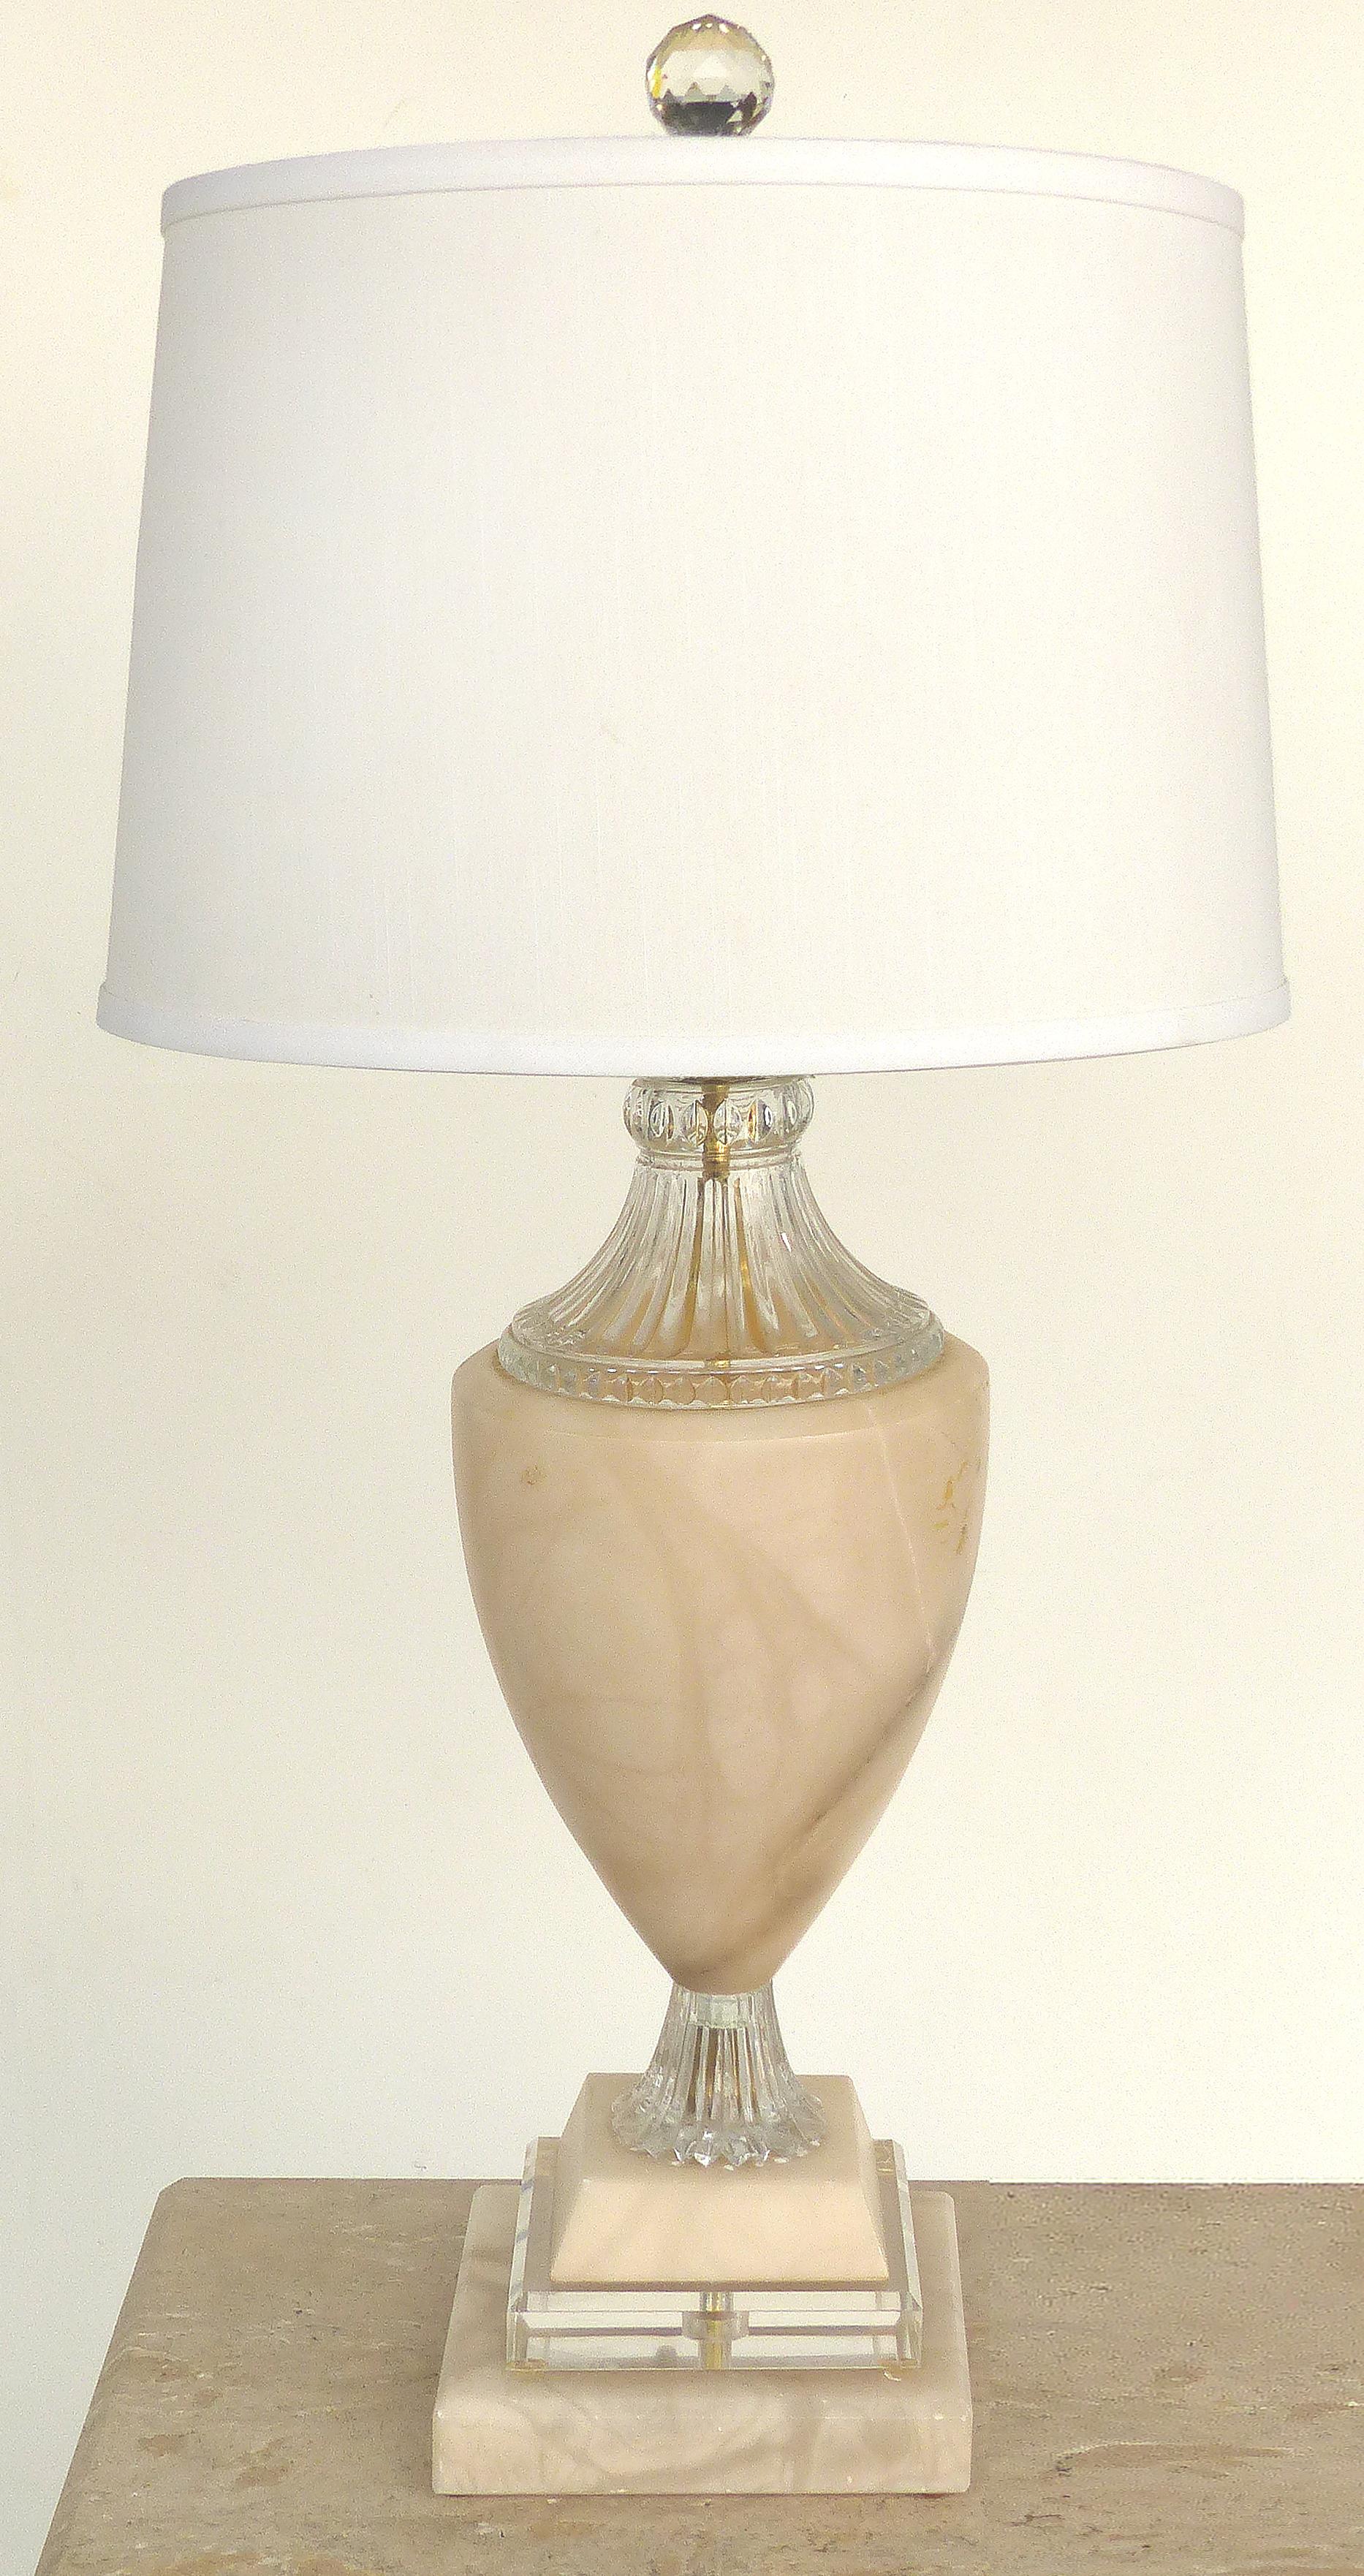 Traditional Alabaster Urn Form Table Lamps with Glass and Crystal Accents, Pair

Offered for sale is a stately pair of urn form alabaster table lamps with cut and pressed glass accents. Each lamp is topped with faceted crystal finials. The alabaster